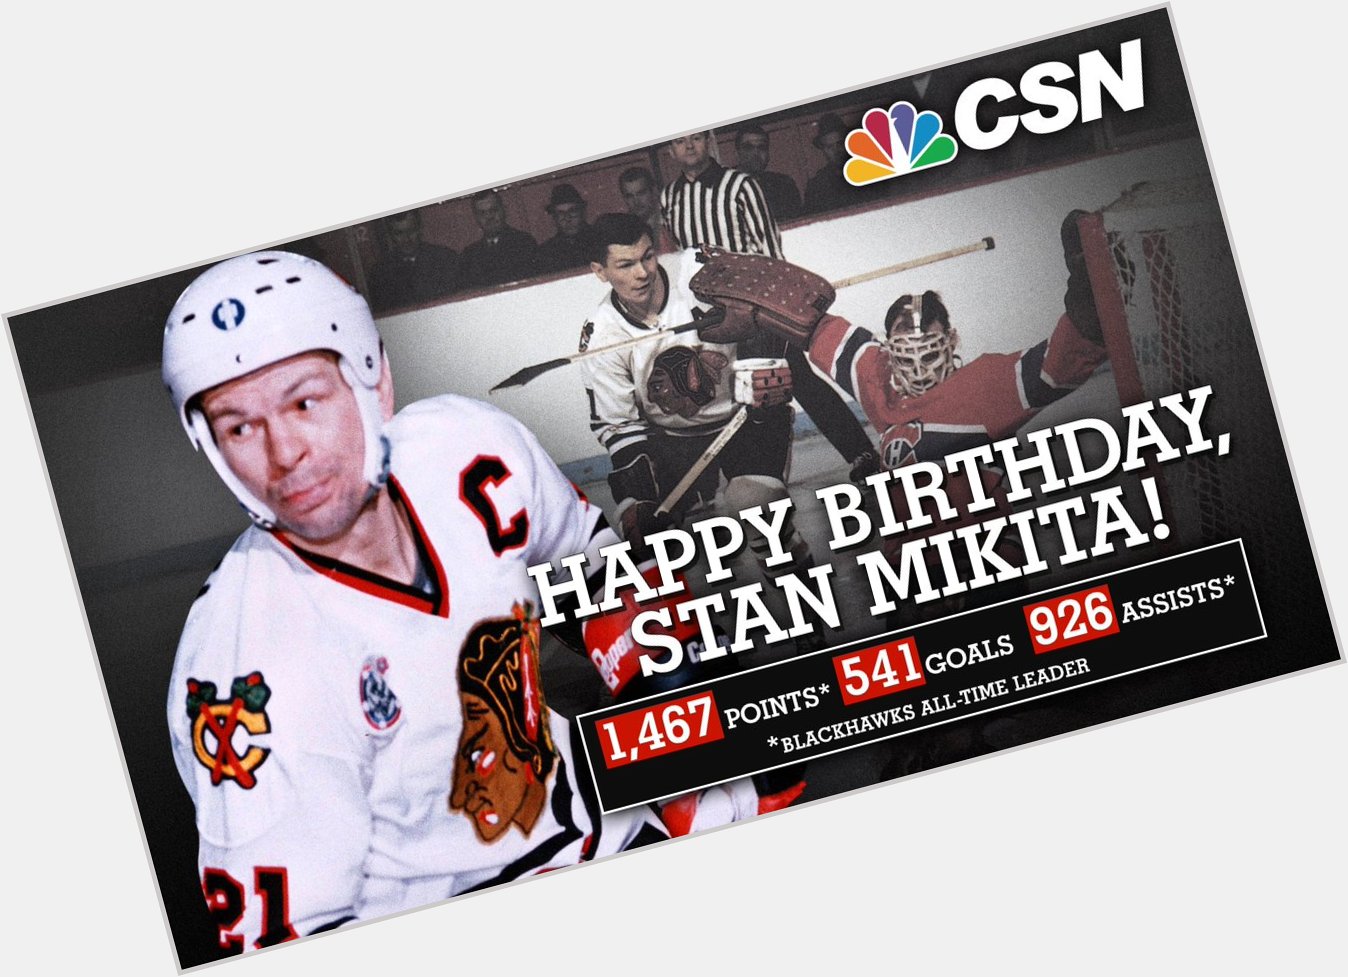 Happy 77th Birthday to the all-time points leader, Stan Mikita. 